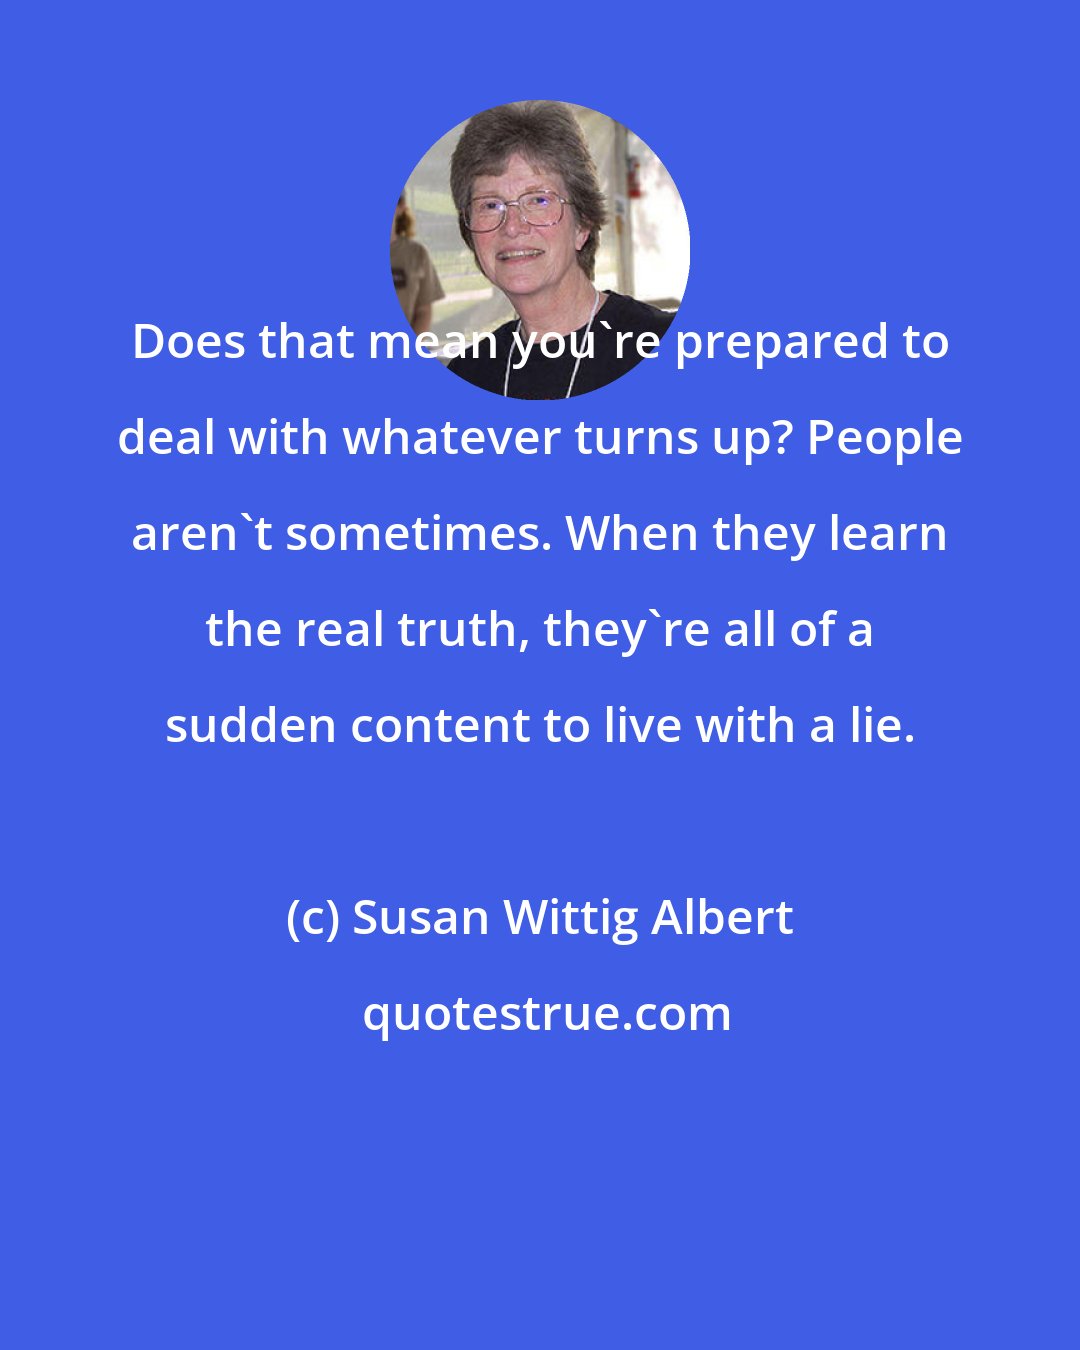 Susan Wittig Albert: Does that mean you're prepared to deal with whatever turns up? People aren't sometimes. When they learn the real truth, they're all of a sudden content to live with a lie.